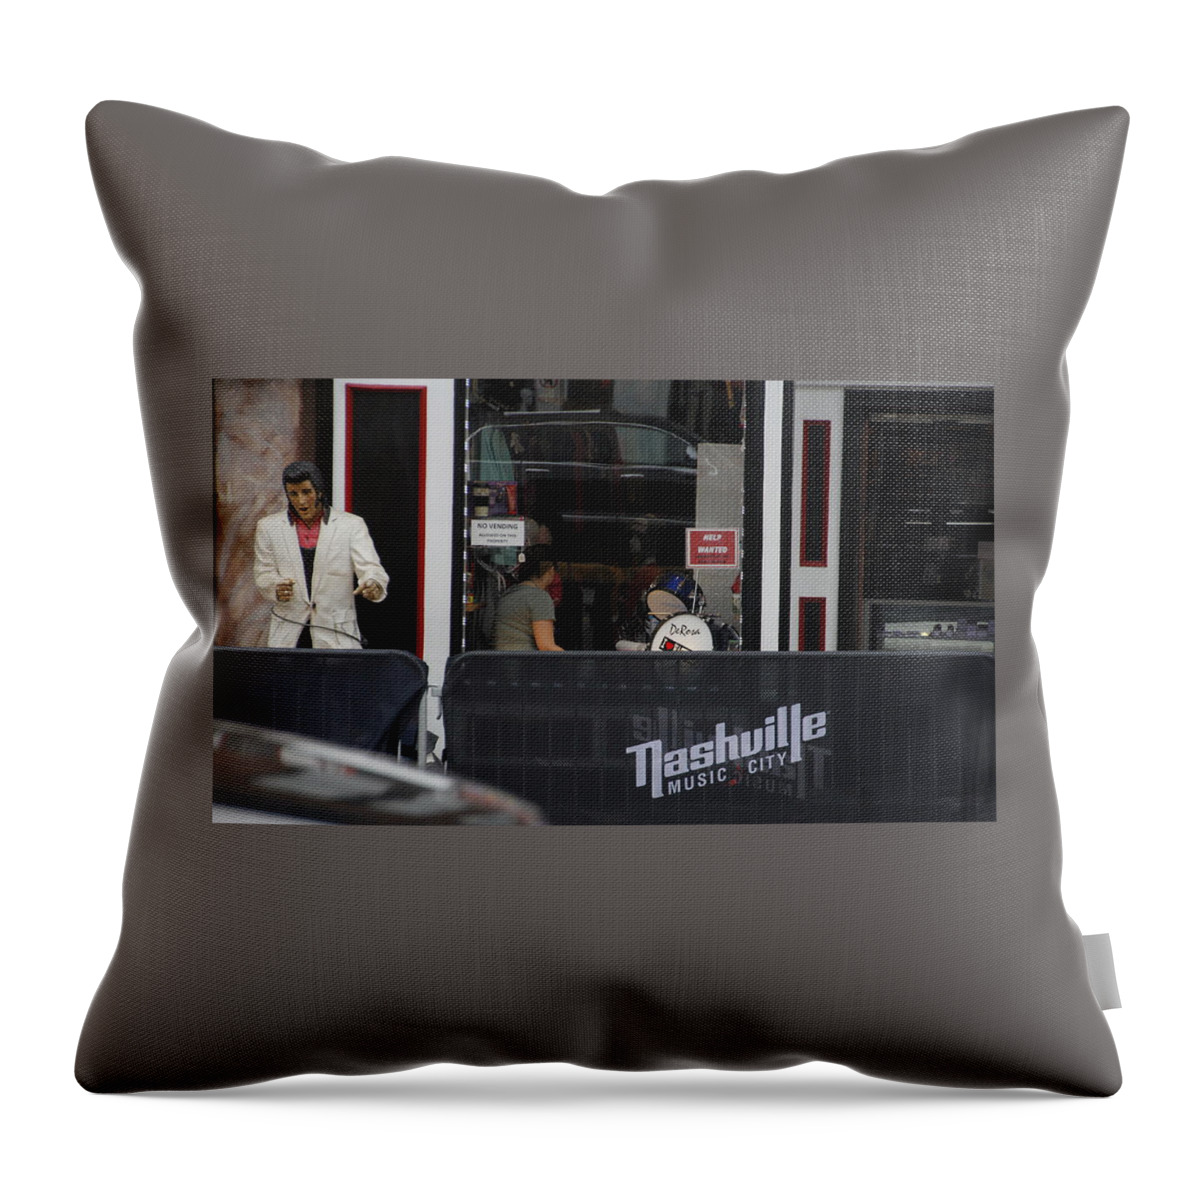 Nashville Music City Sign Throw Pillow featuring the photograph Music City Elvis by Valerie Collins